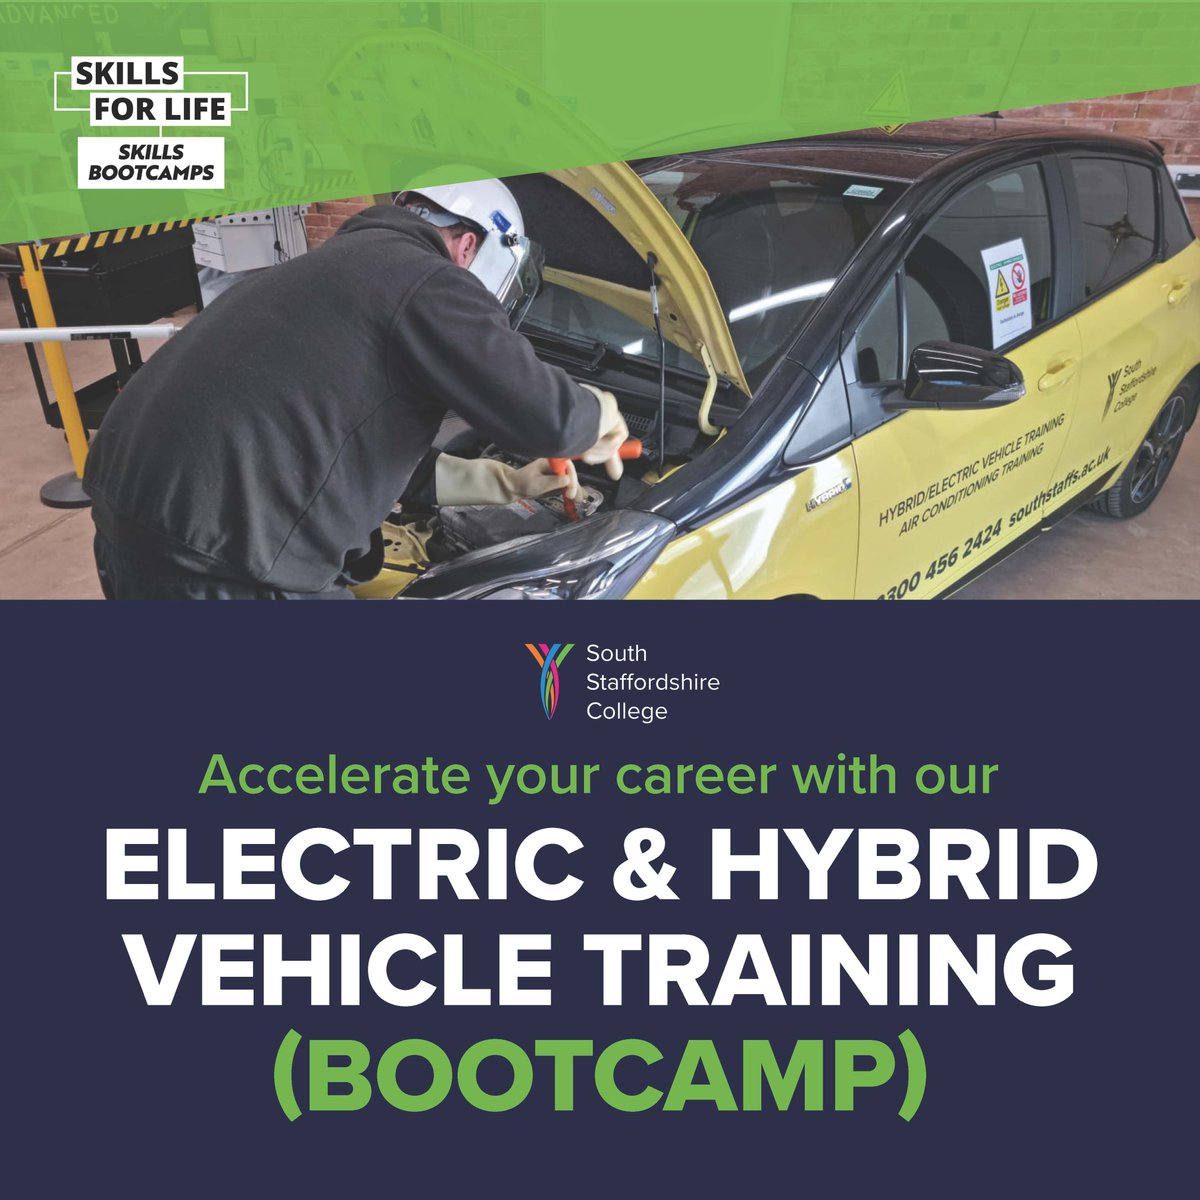 We have an Electric & Hybrid Vehicle Training Bootcamp starting next month! ⚡🚗 This training is ideal for technicians looking to upgrade their skills or for those who are unemployed & looking to get back into the trade! The bootcamp starts June 10th ➡ orlo.uk/rX1eE